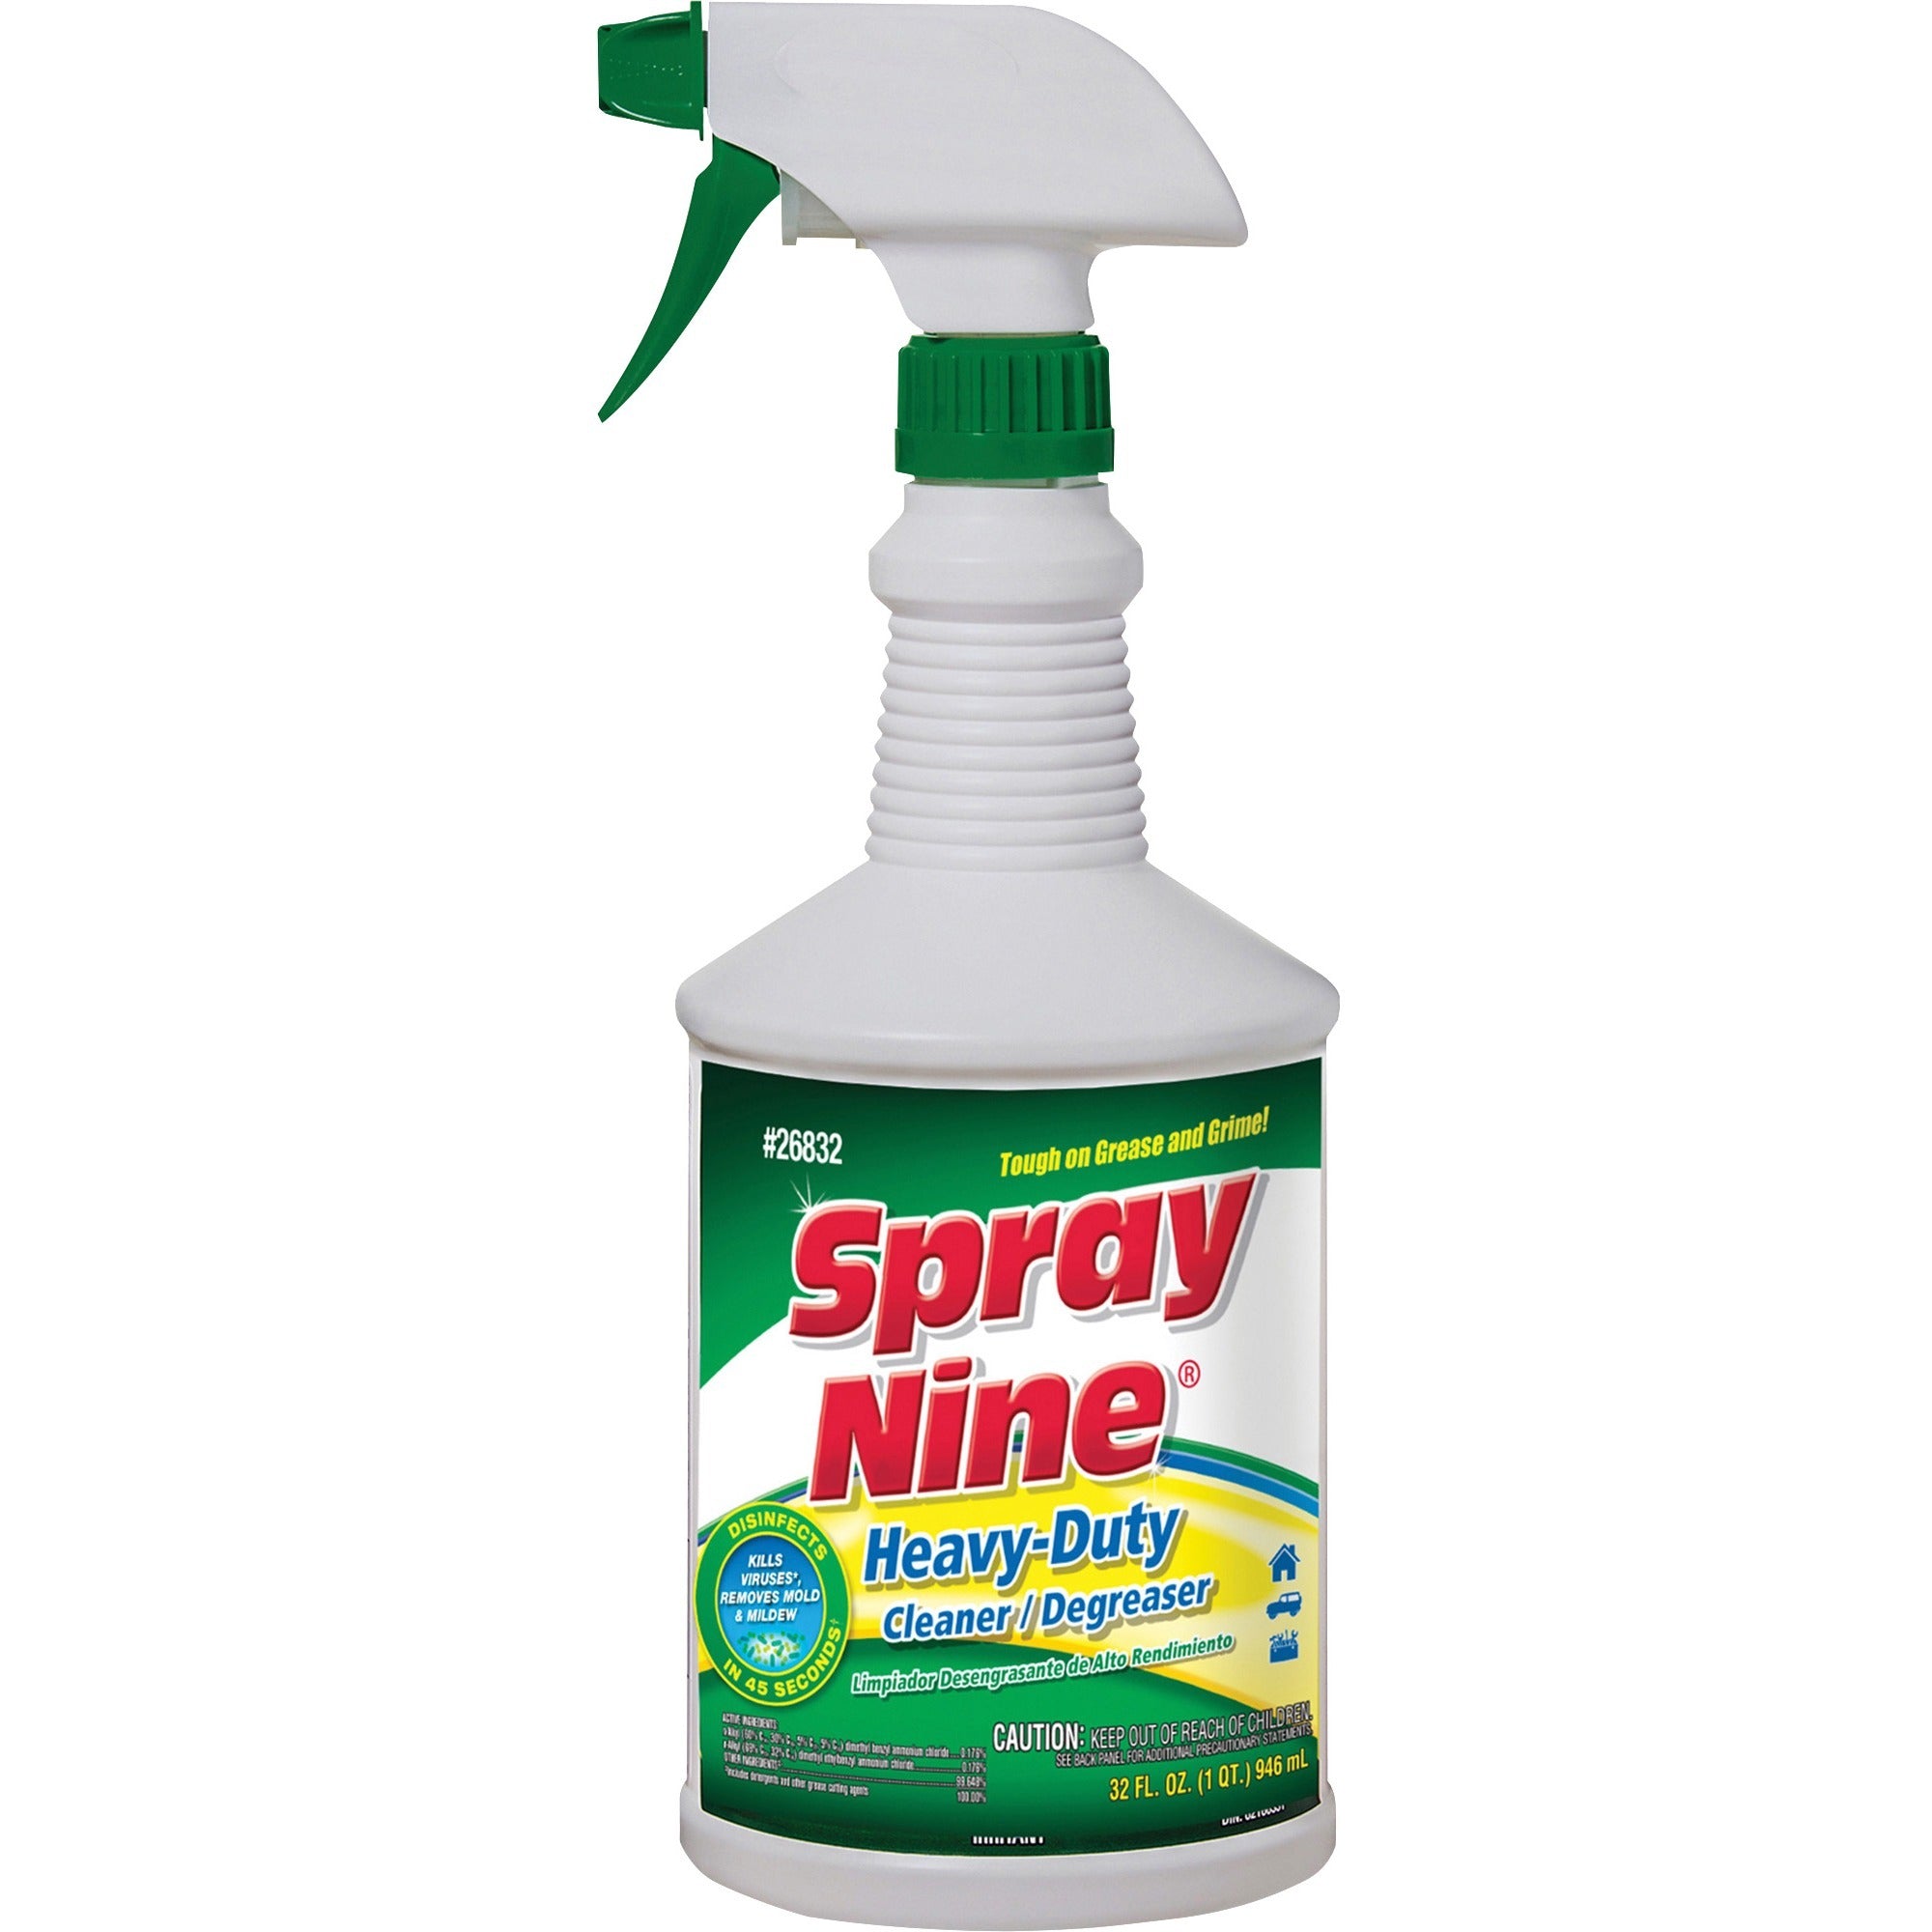 Spray Nine Heavy-Duty Cleaner/Degreaser w/Disinfectant - 32 fl oz (1 quart)Bottle - 12 / Carton - Disinfectant, Water Based, Petroleum Free, Antibacterial - Clear - 2